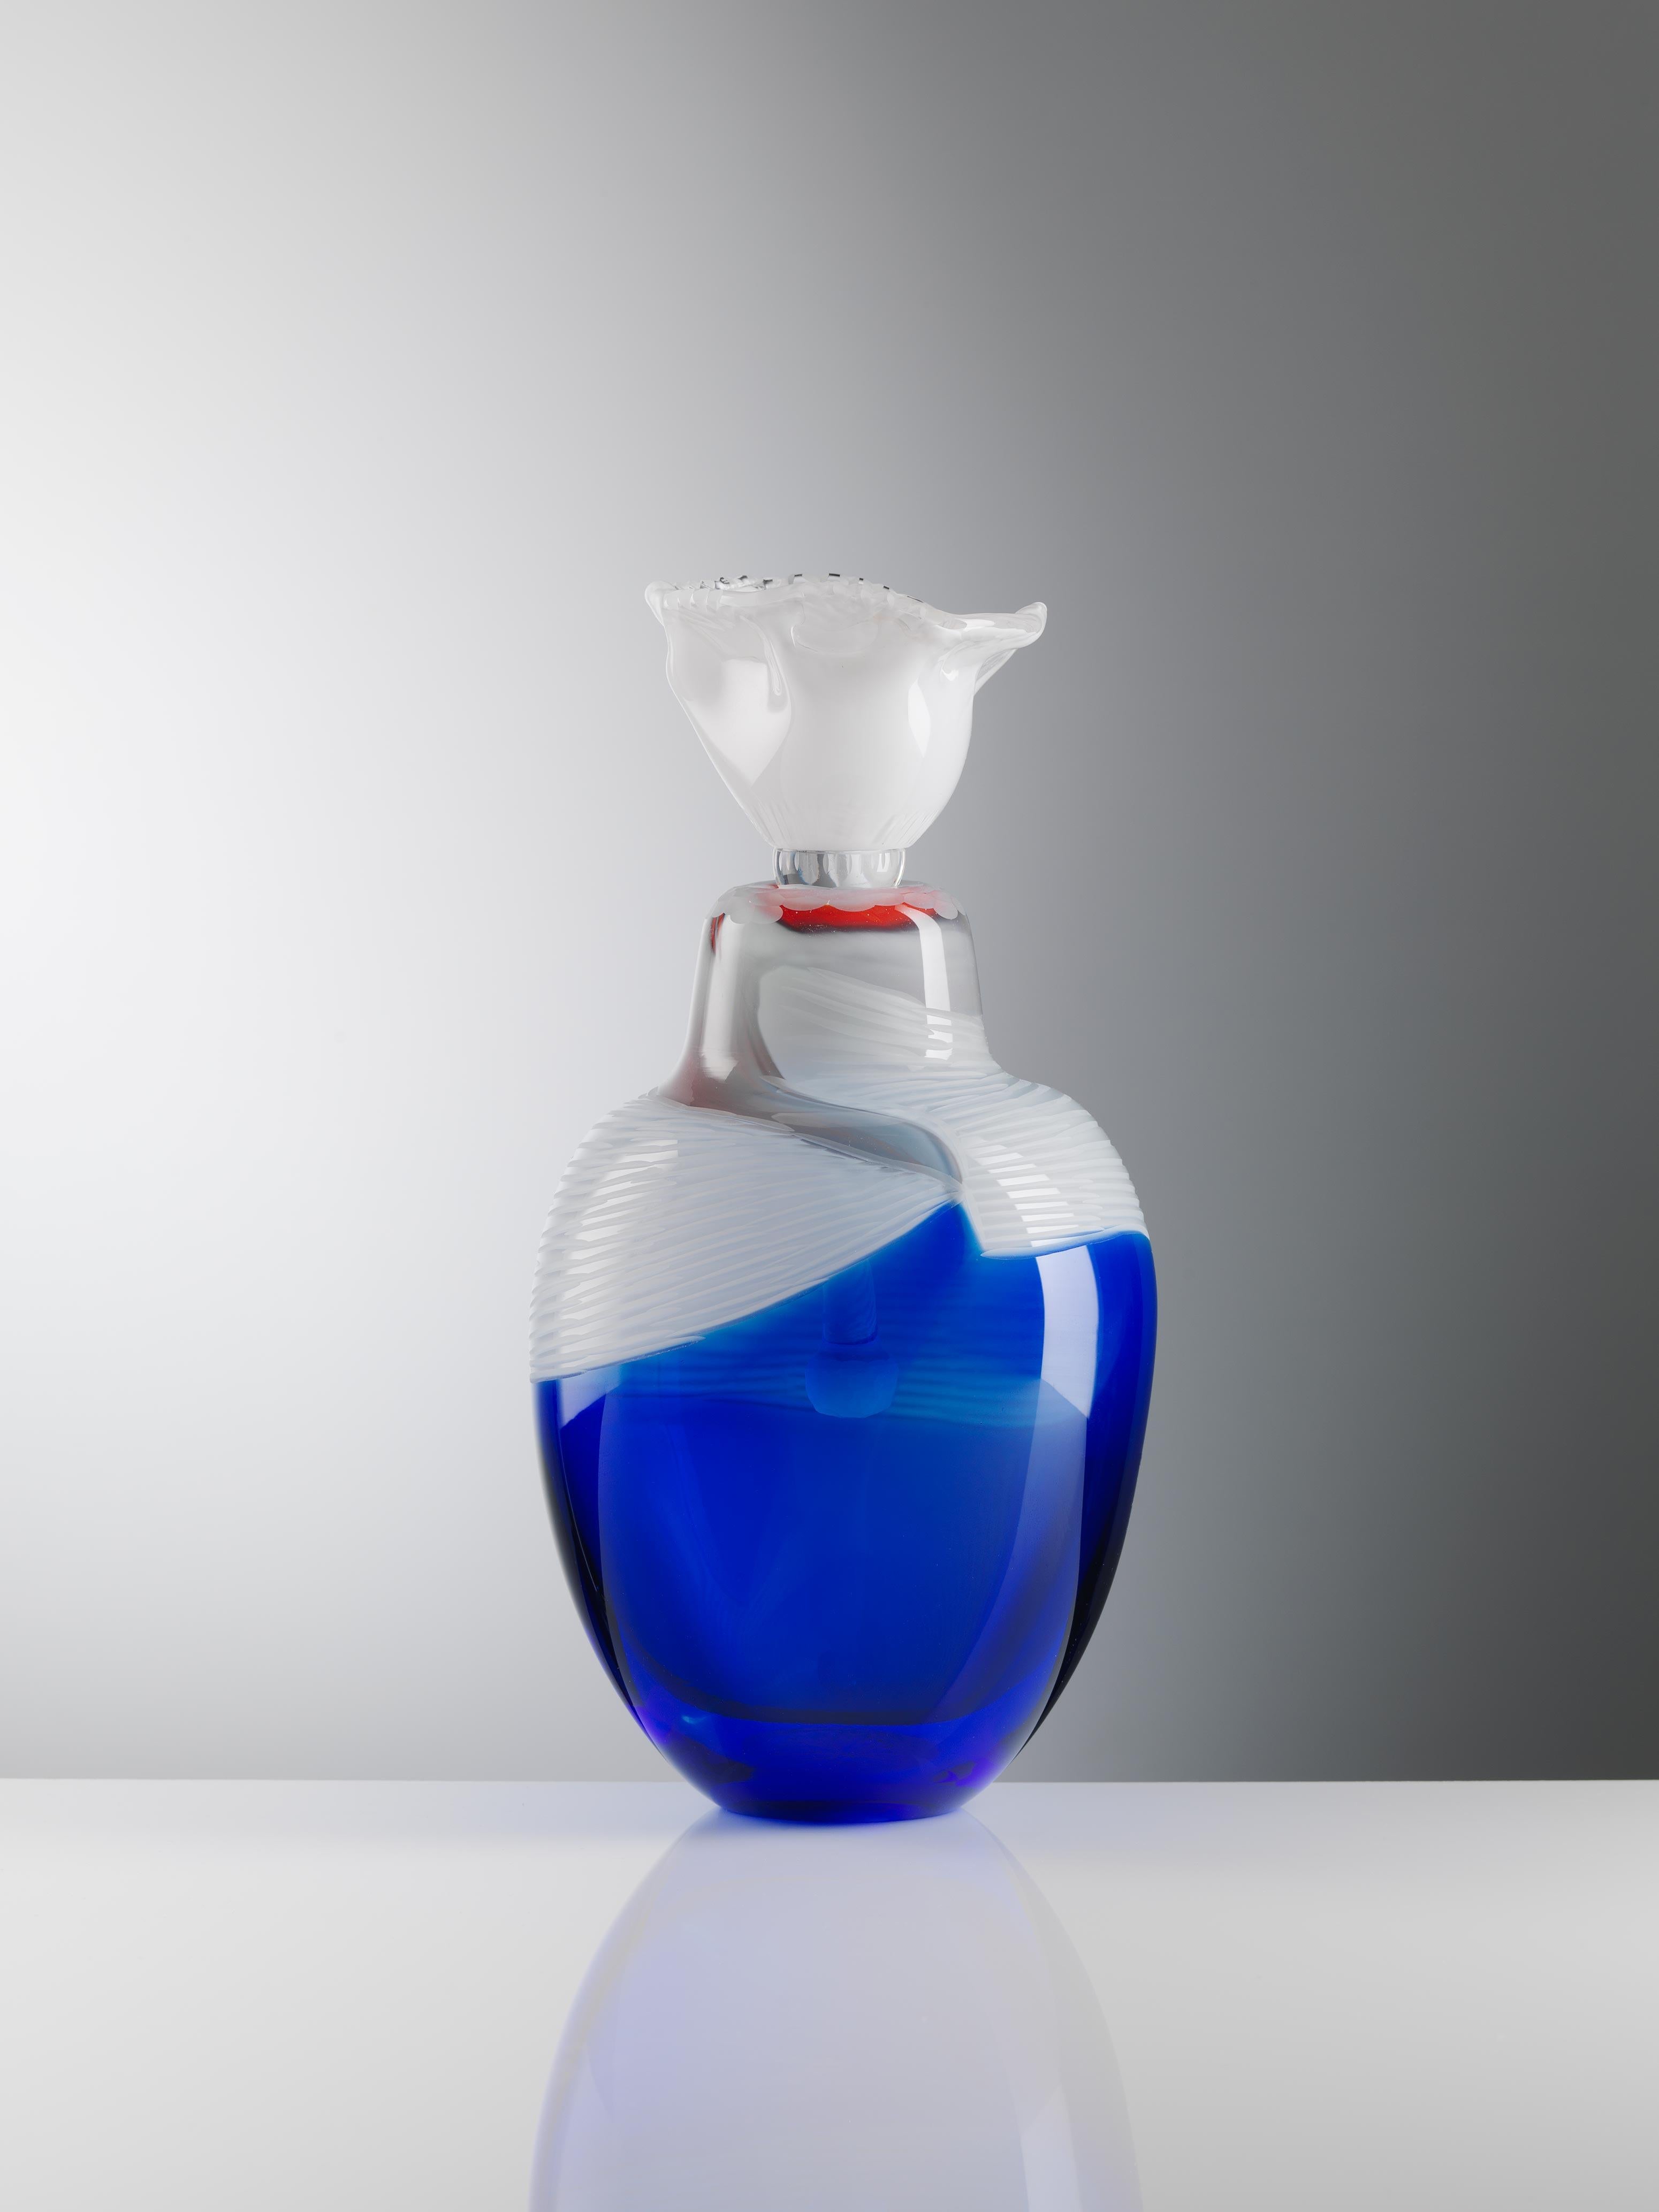 Indigo Solace4 sculpted blown glass vase handmade by Juli Bolaños-Durman
Solace Collection 2016 - 2017
One of a kind
Dimensions: 12.6 x 6.3 x 6.3 inches
Materials: Found & blown glass with cuttings

This piece is made of two parts: stopper and